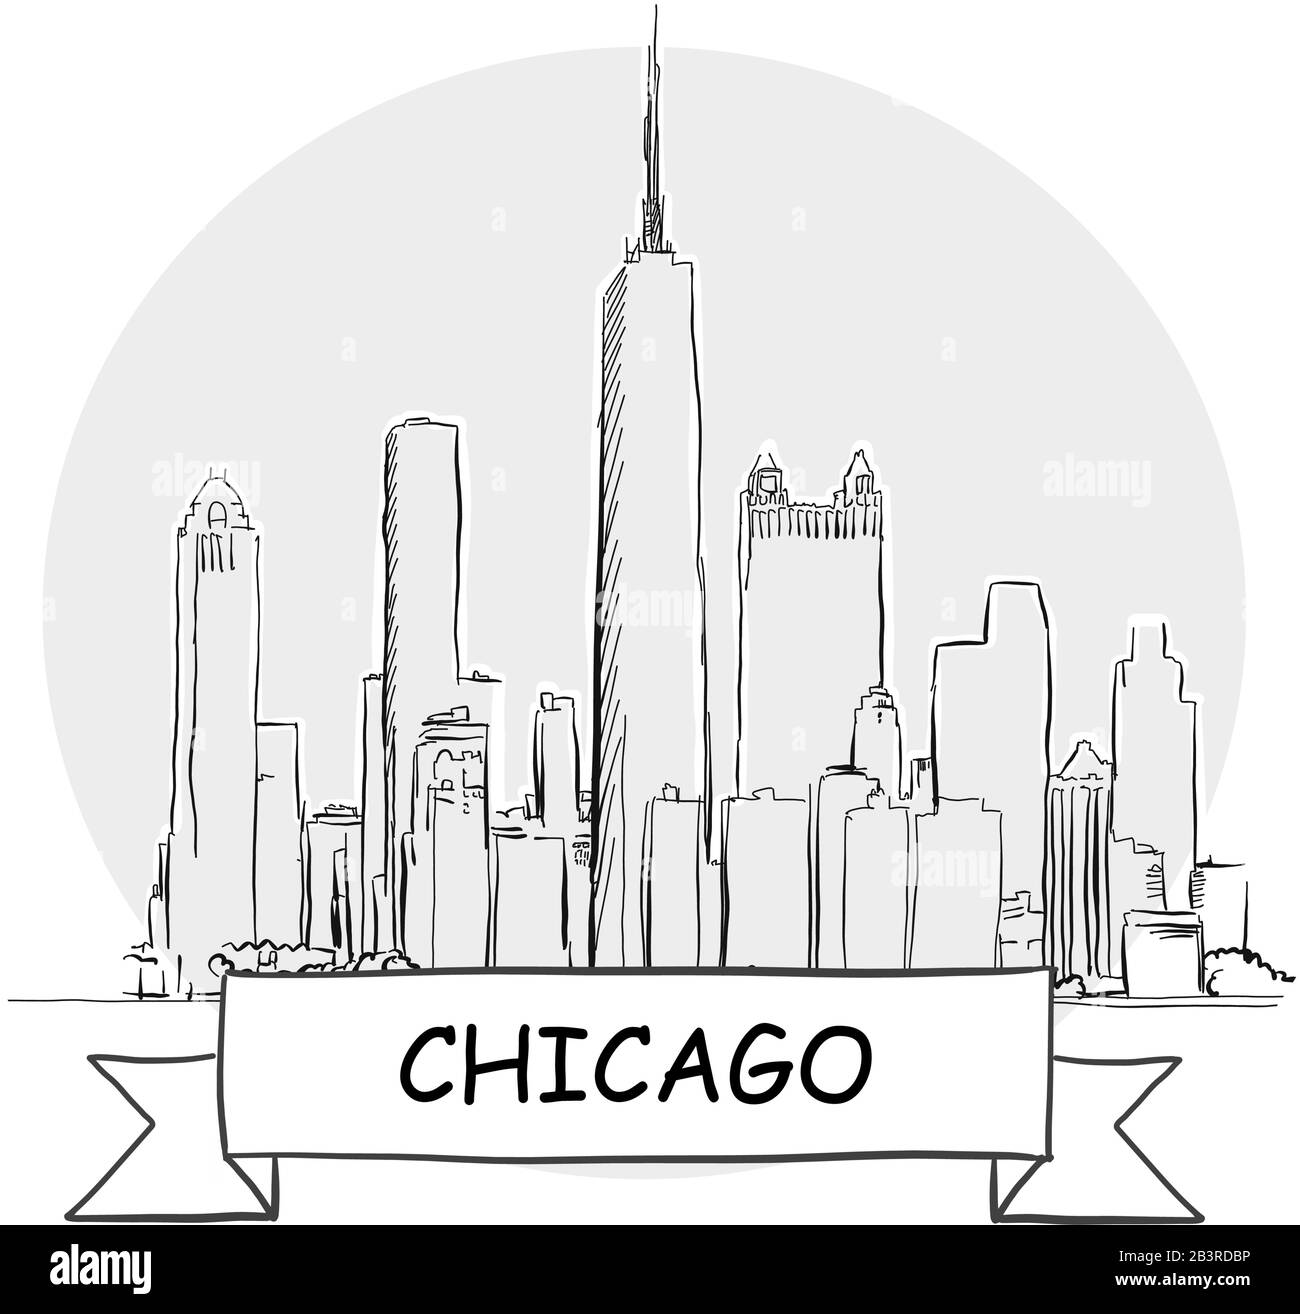 Chicago Hand-Drawn Urban Vector Sign. Black Line Art Illustration with Ribbon and Title. Stock Vector